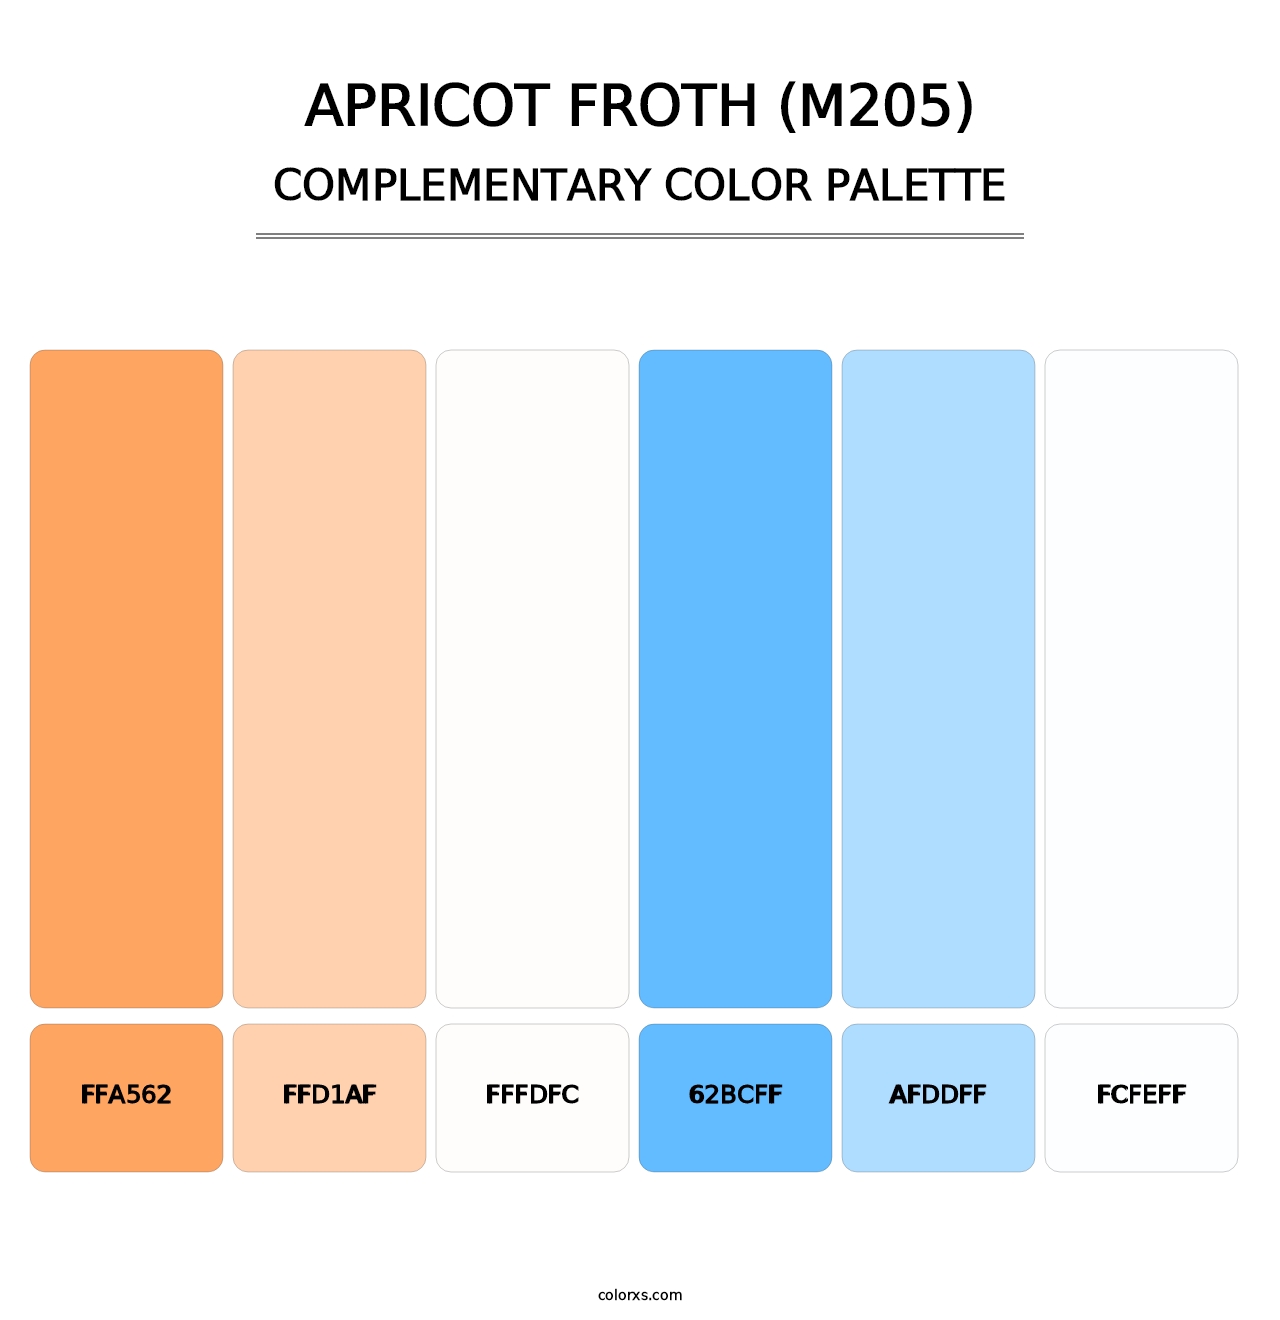 Apricot Froth (M205) - Complementary Color Palette